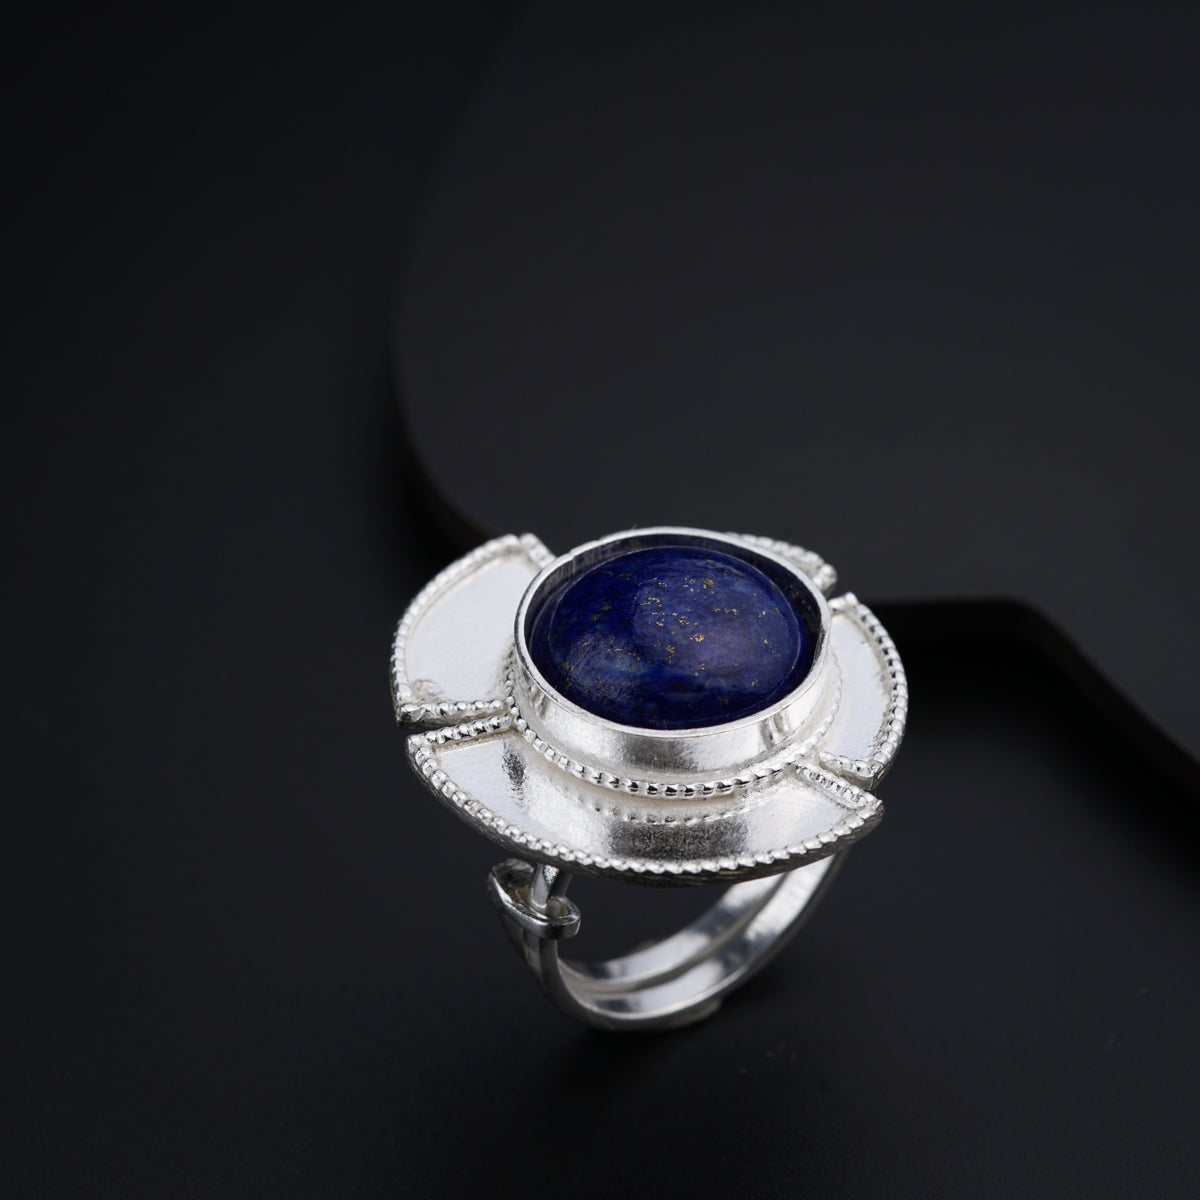 a silver ring with a blue stone in it